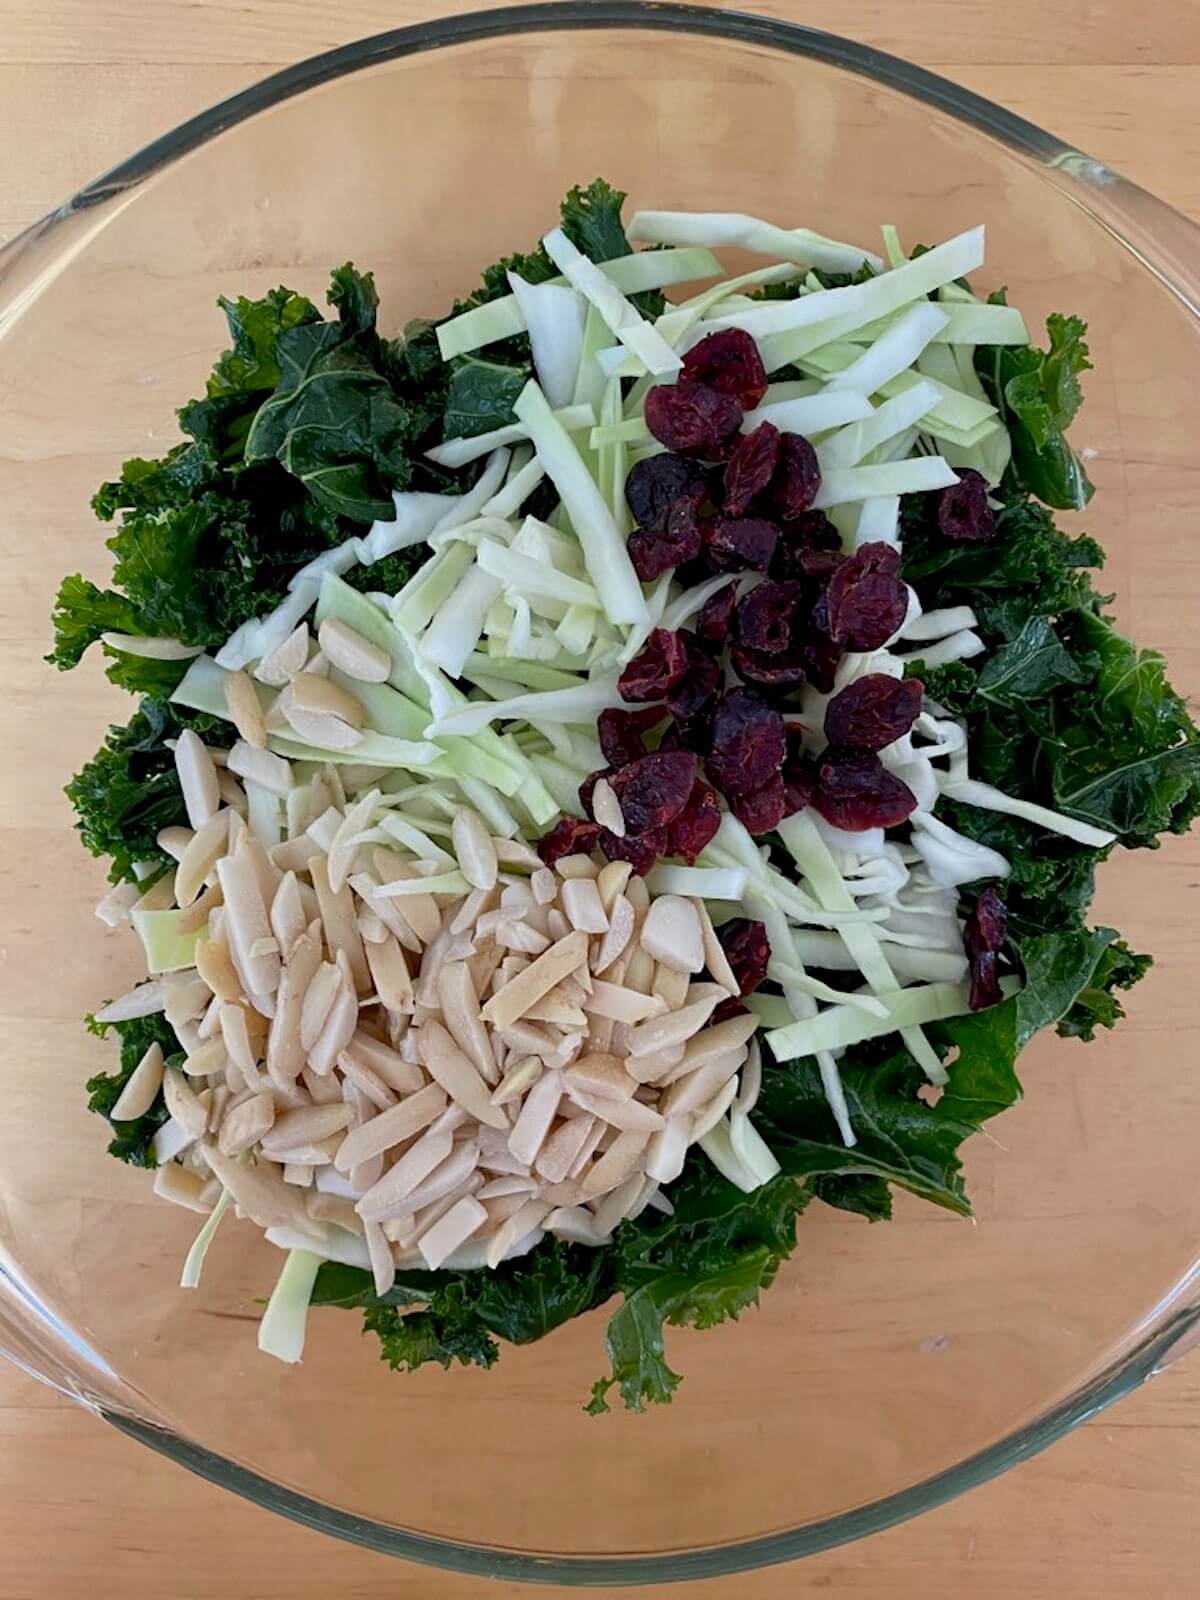 All of the salad ingredients in a glass mixing bowl.